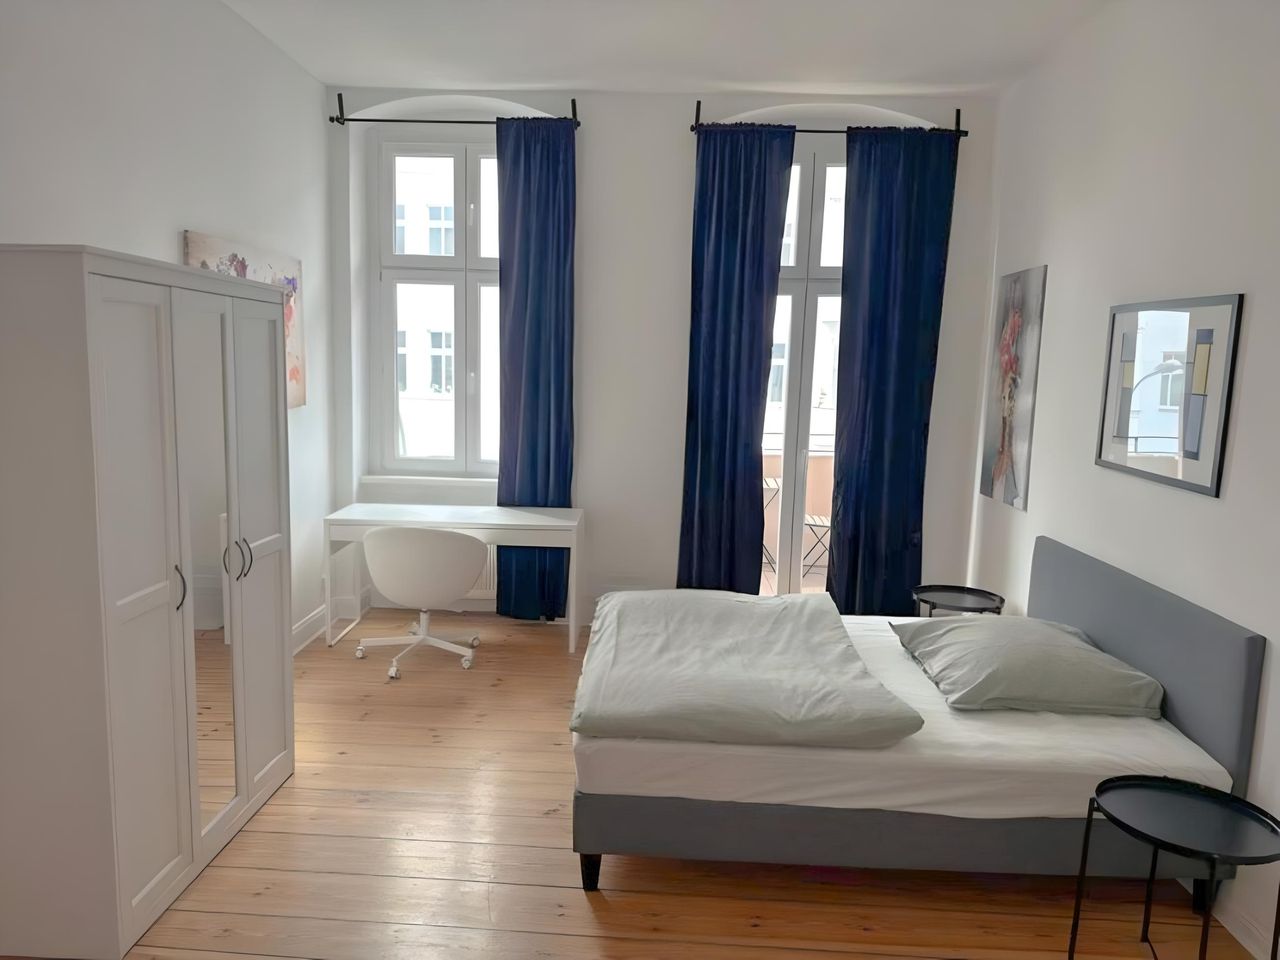 Awesome 4 bedroom apartment located in Berlin Friedrichshain